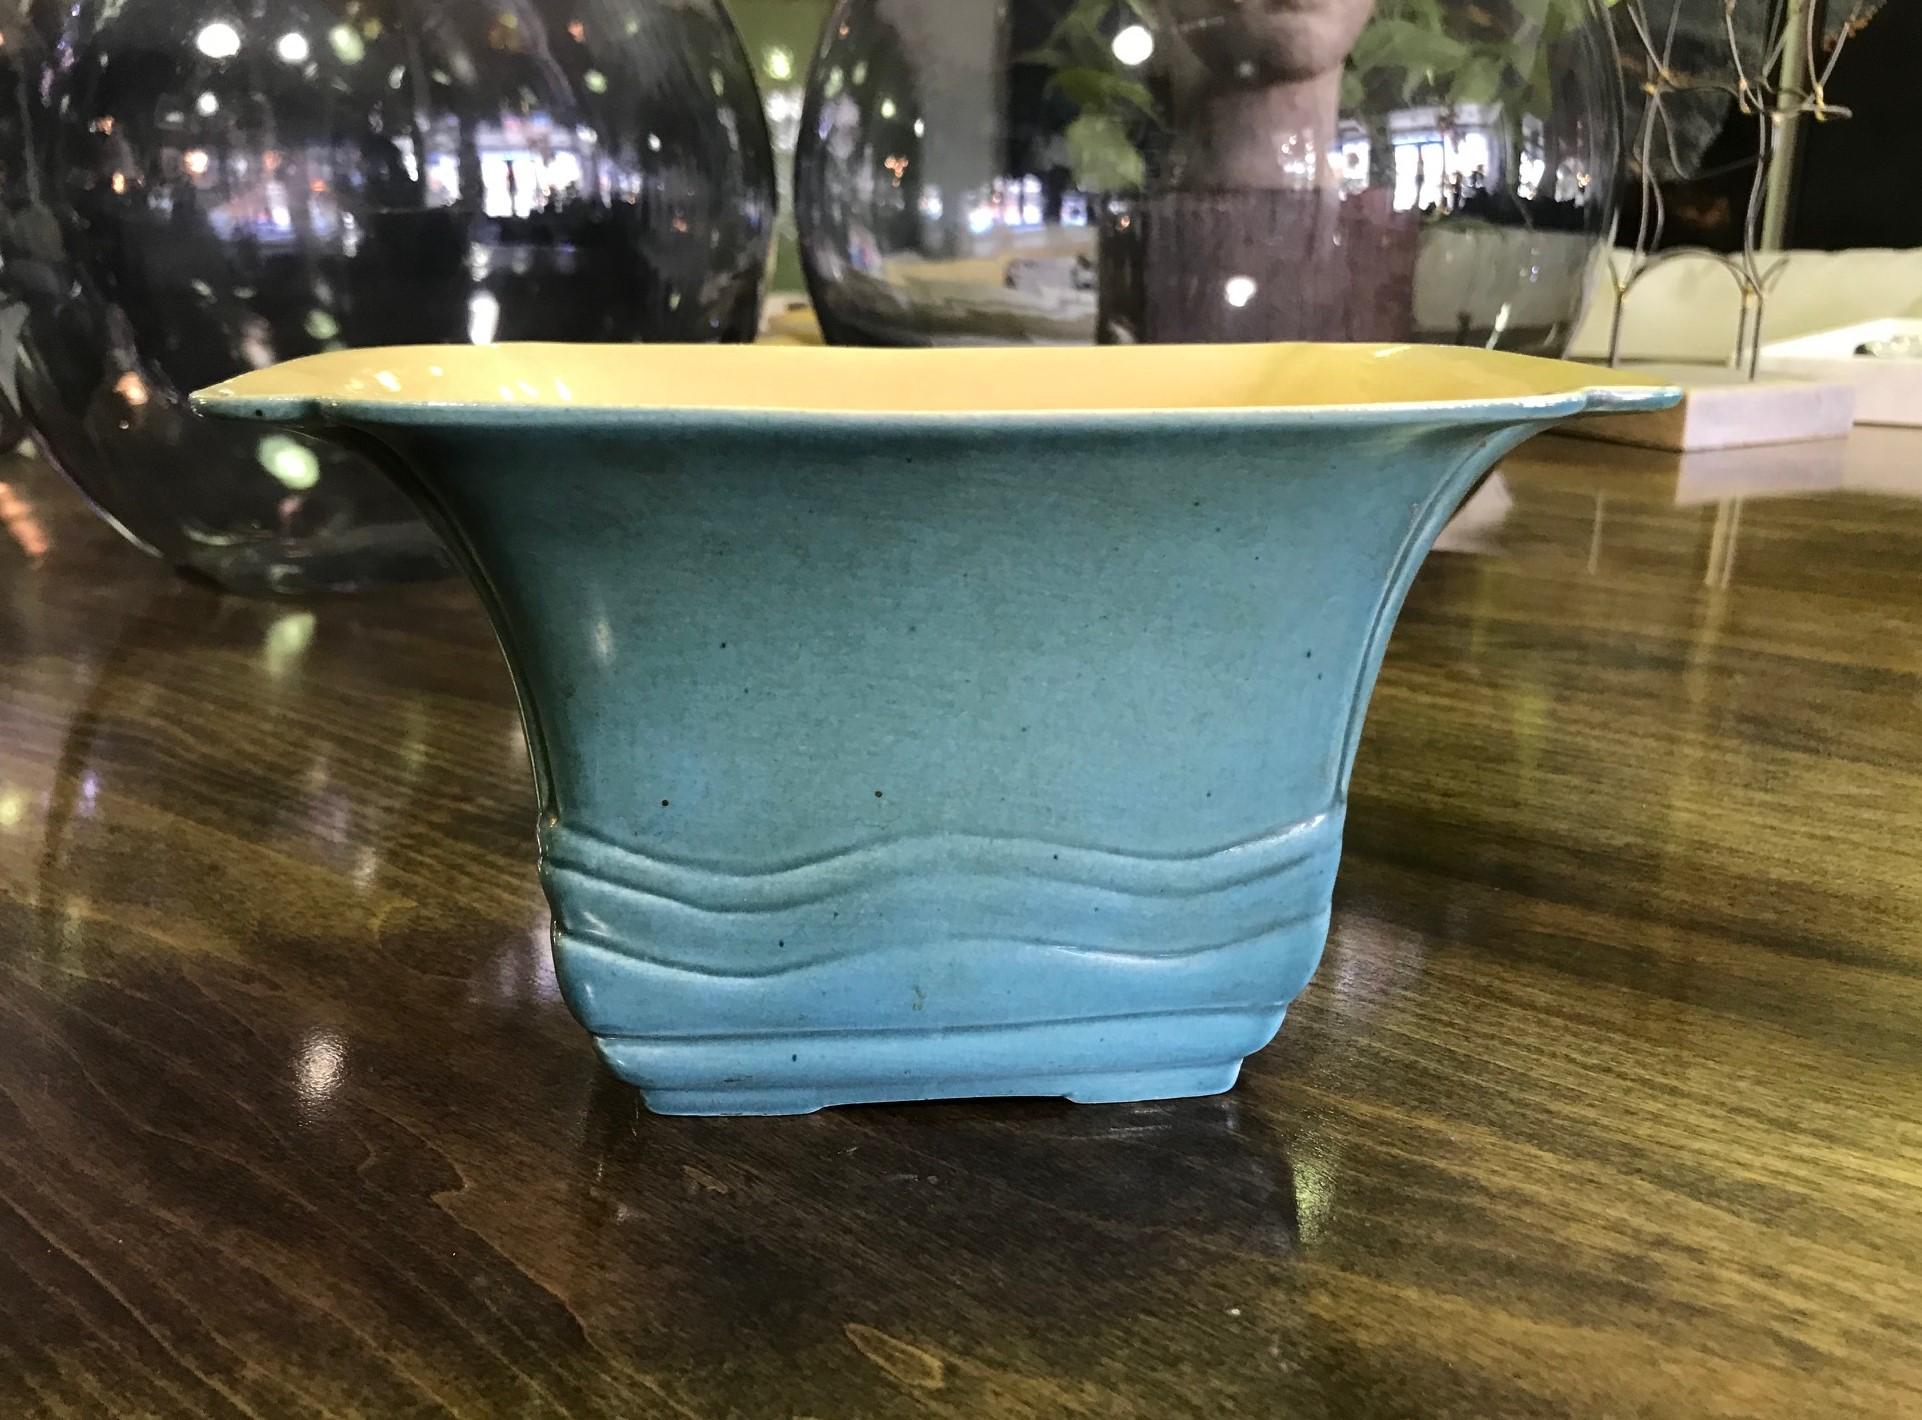 A wonderfully glazed and rare shaped work by famed Arts & Crafts ceramic artist Ernest A. Batchelder.

Batchelder was renowned in the 1930s and 1940s for his delicate, thinly made Asian inspired ceramics which he produced at his Kinneloa Avenue